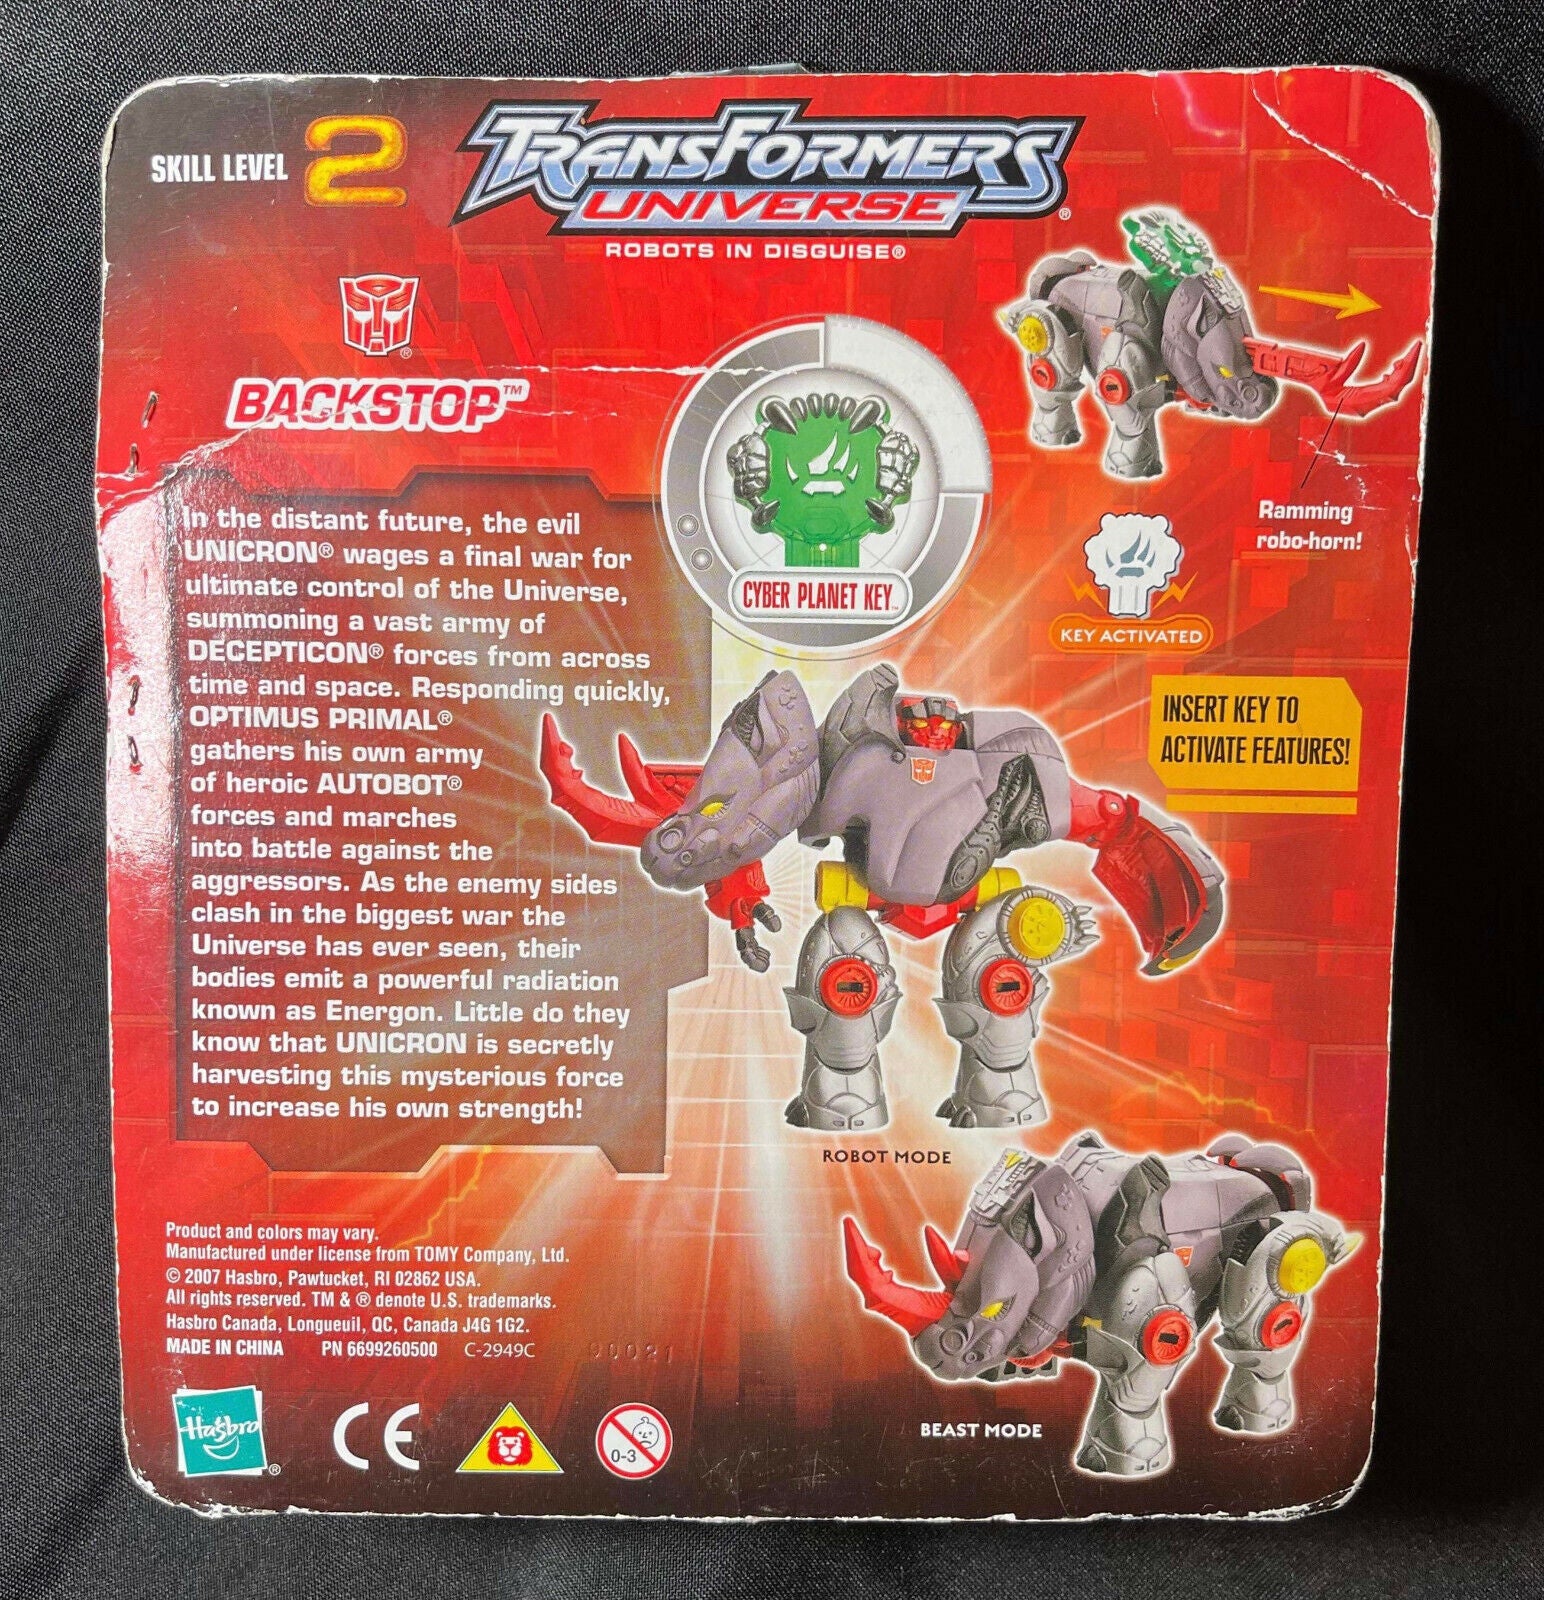 Transformers Universe Robots in Disguise Backstop Figure NIB with damage to box